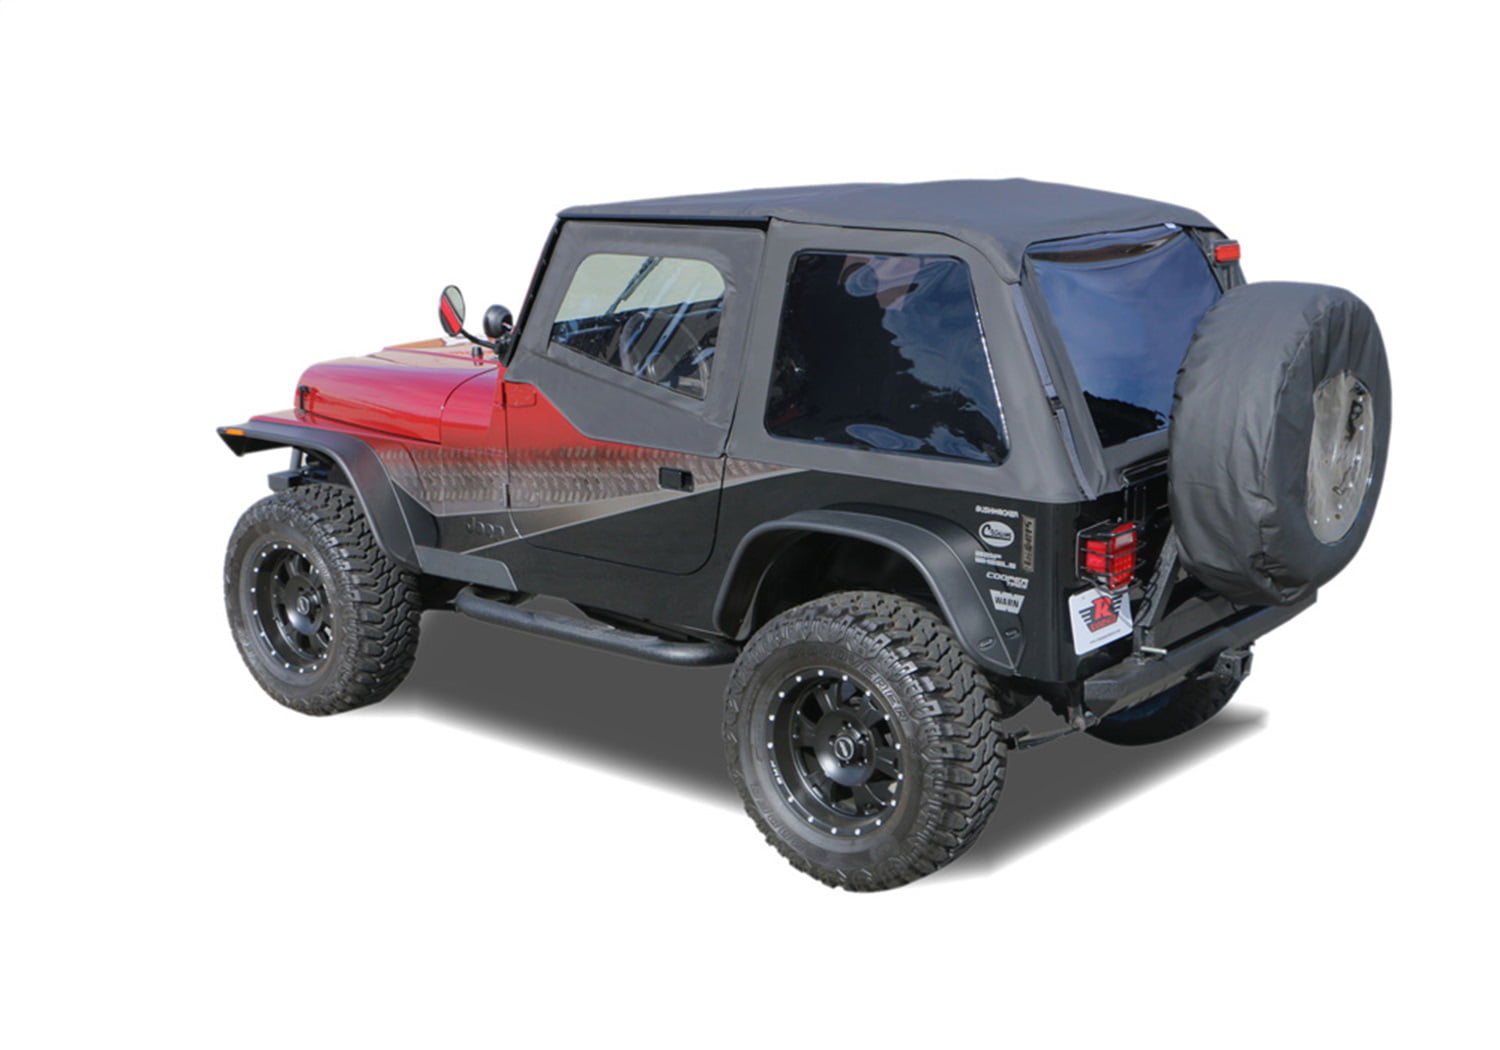 Rampage Products 109435 Frameless Trail Top for 1992-1995 Jeep Wrangler YJ,  Black Diamond w/Tinted Windows 